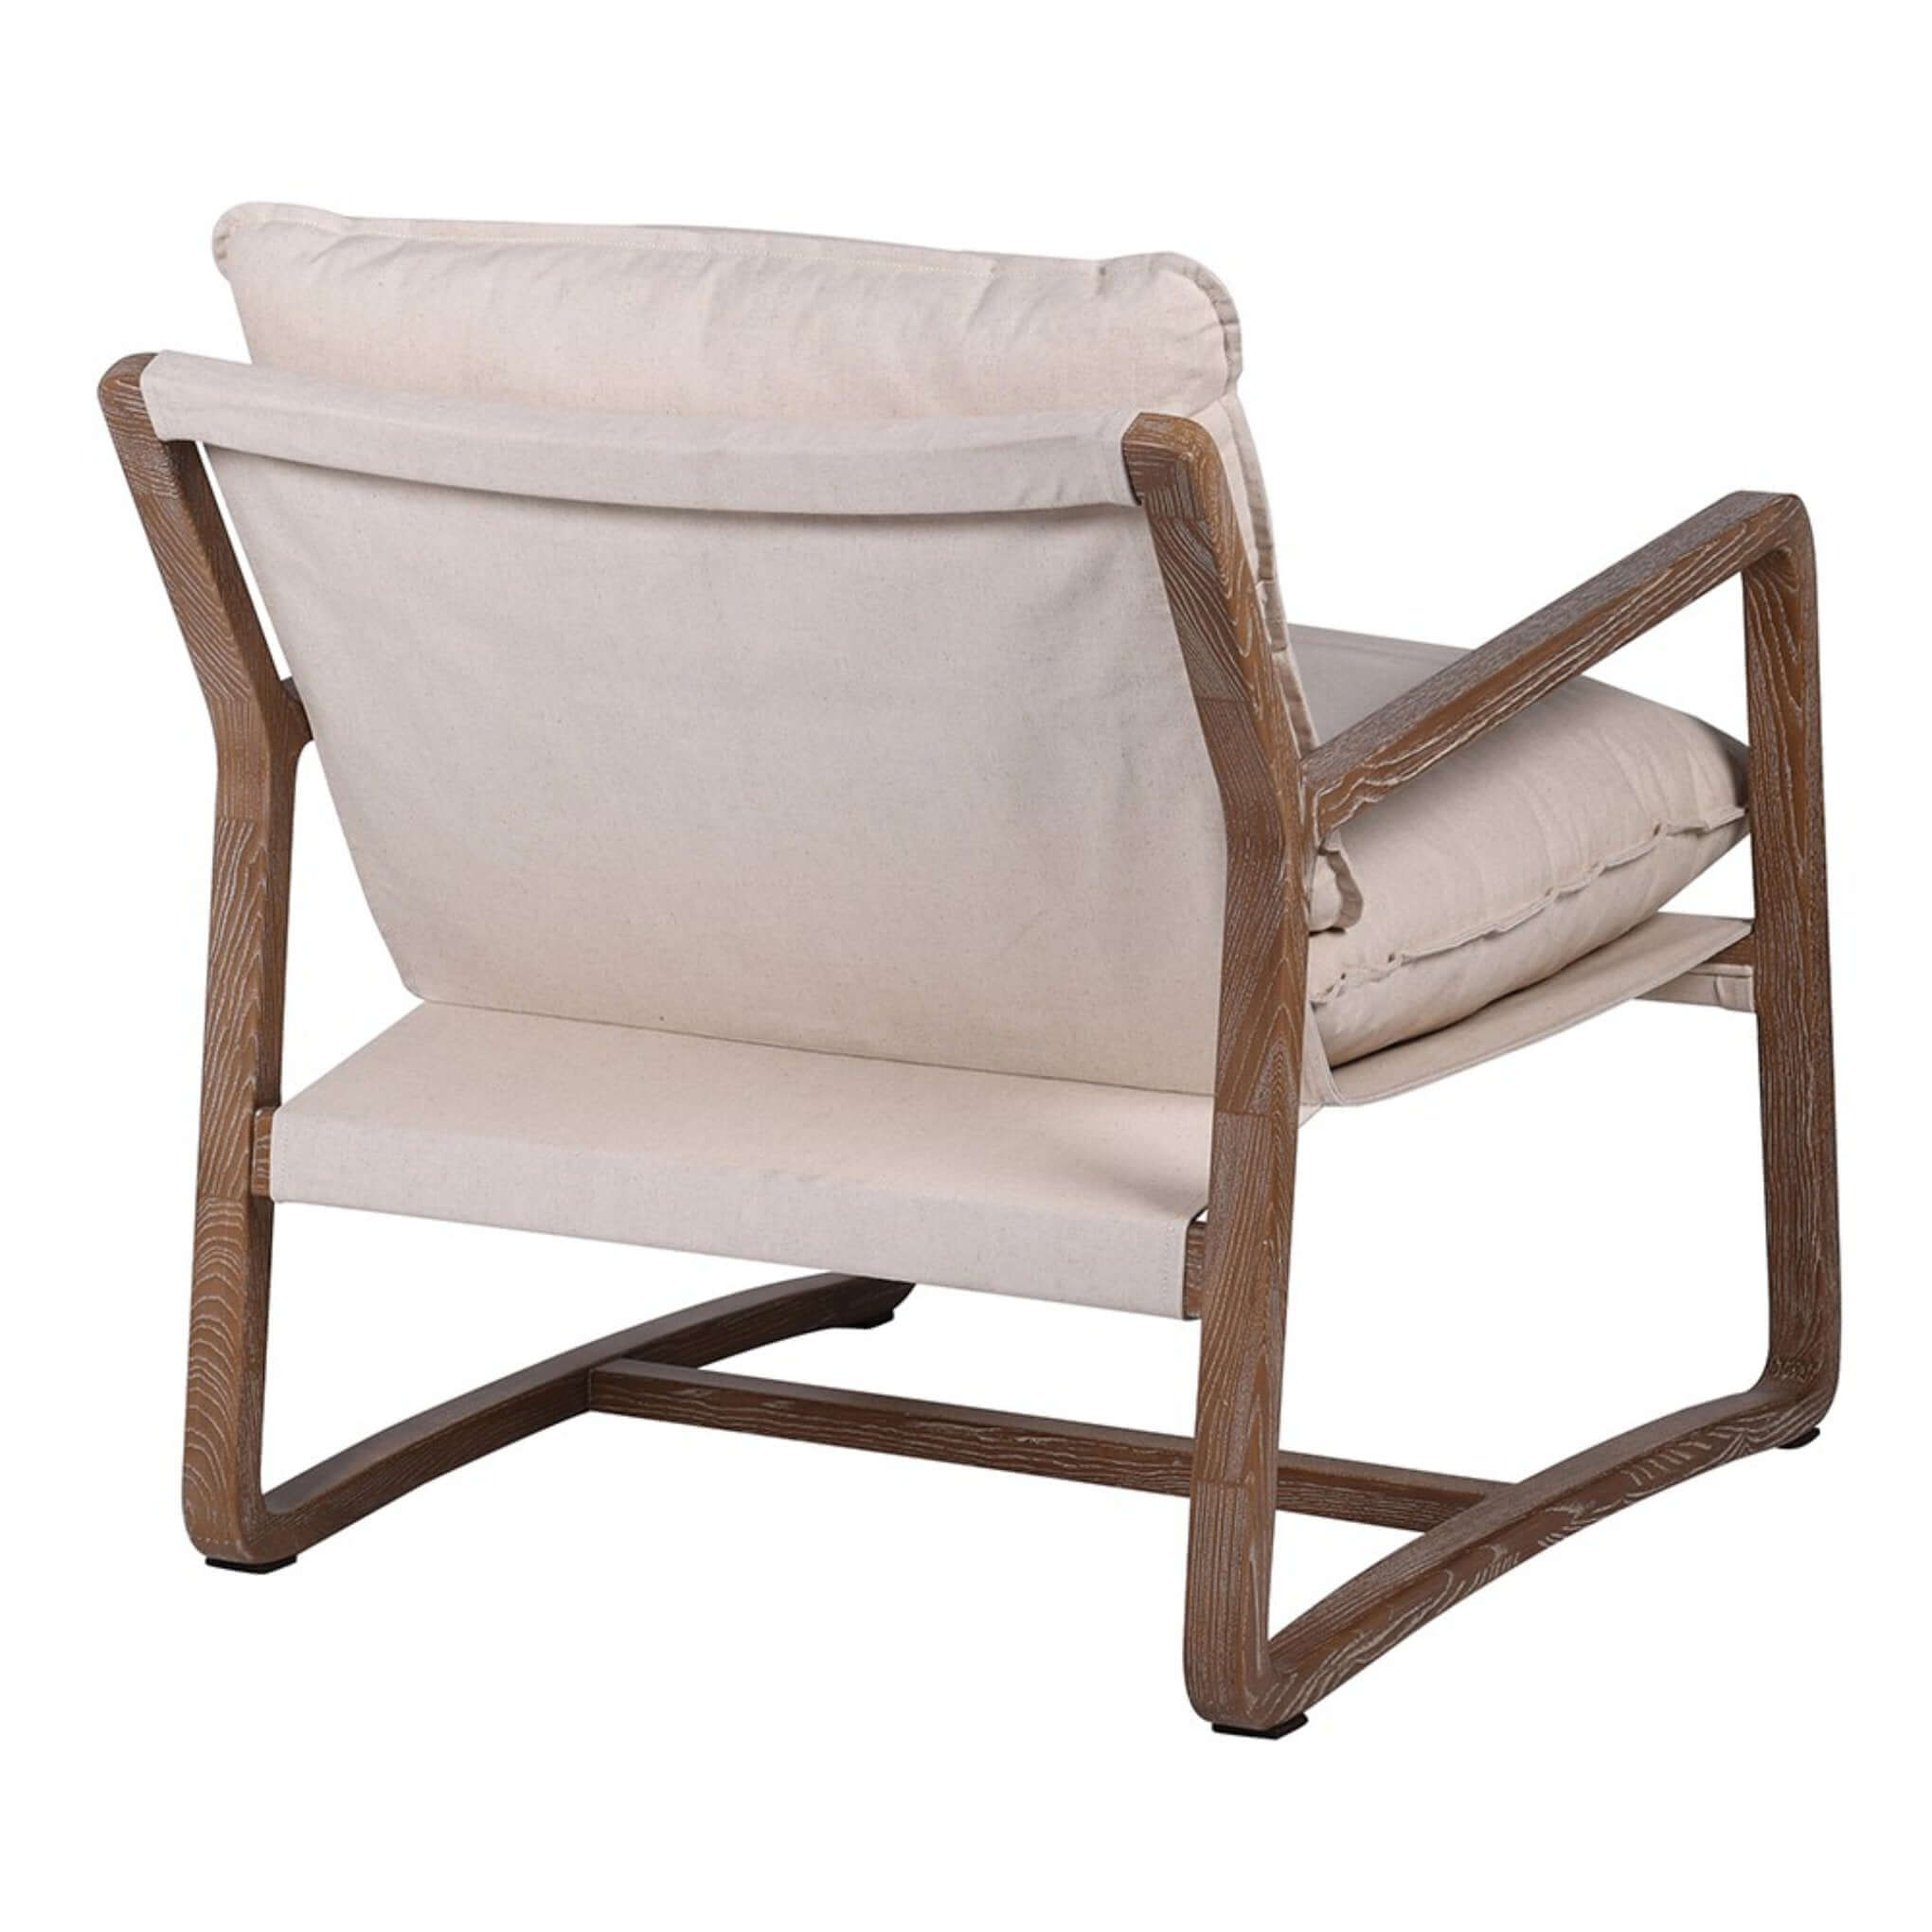 Padstow Chair - Linen - escapologyhome.co.uk